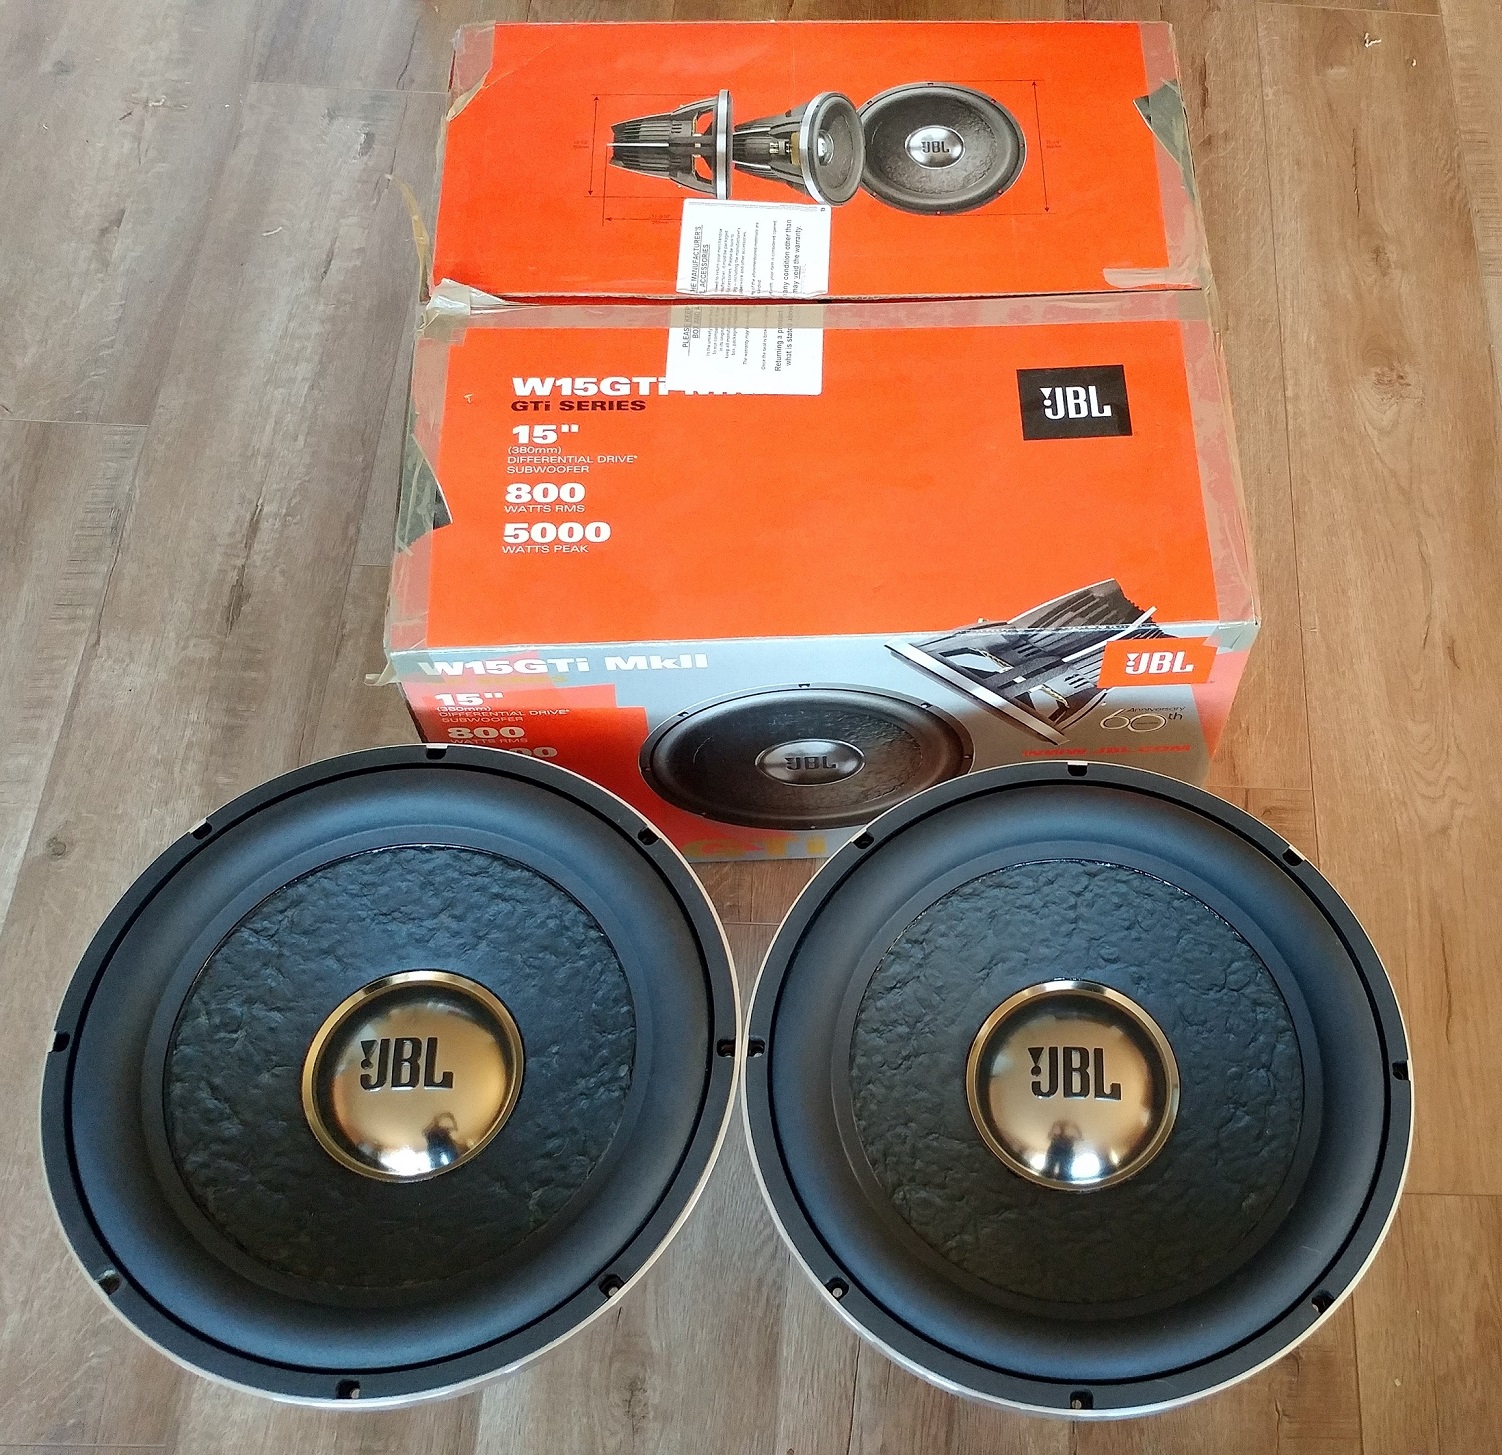 FS: x JBL W15GTI MKII. Shipped or Pickup in Los Angeles. | Audioholics Home Theater Forums